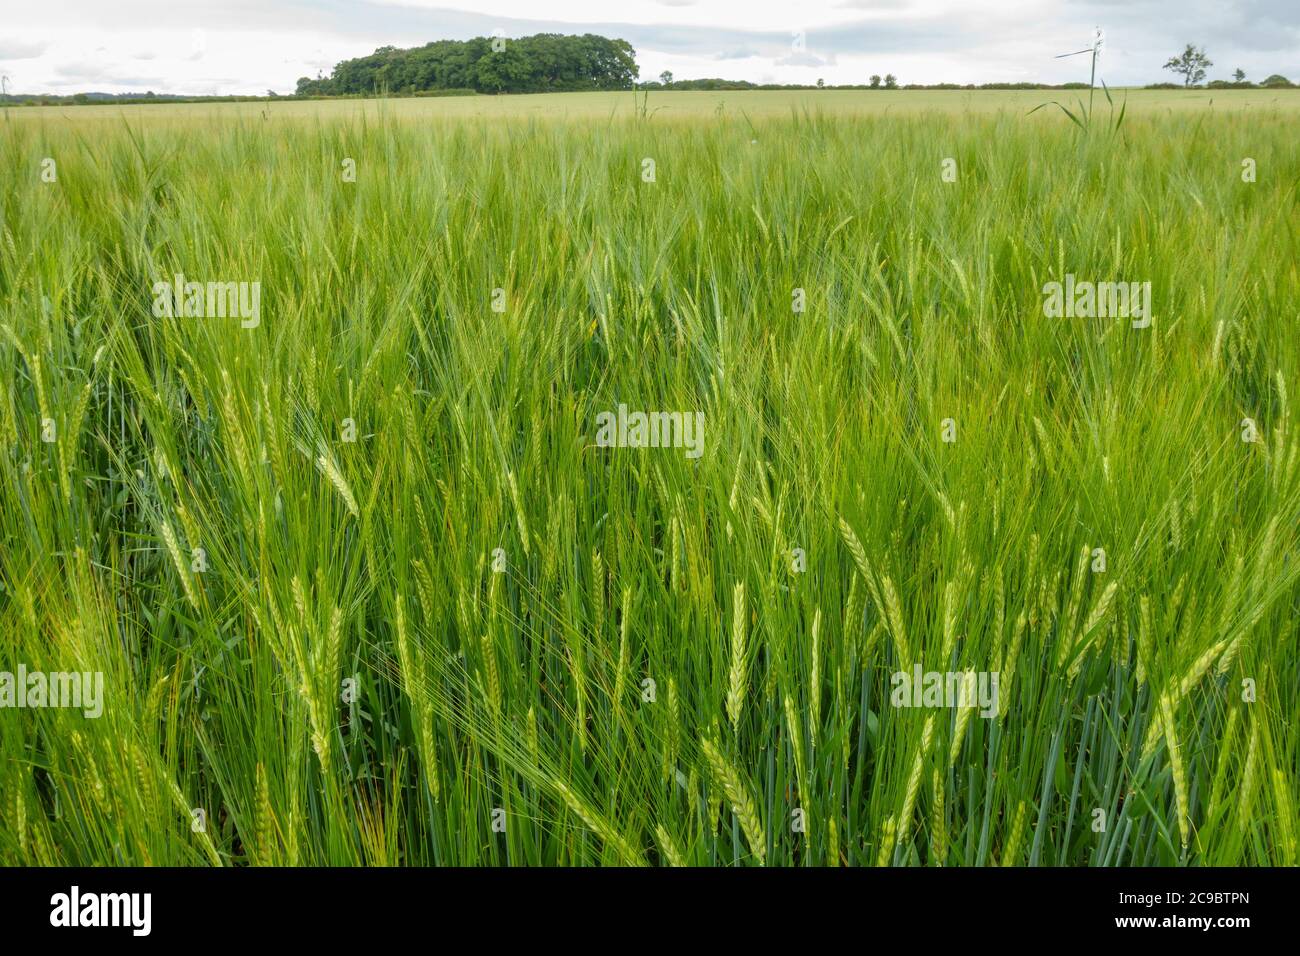 Large field of green ripening barley (Hordeum vulgare) cereal crop growing in Leicestershire field showing ears, spikes and grains, England, UK Stock Photo